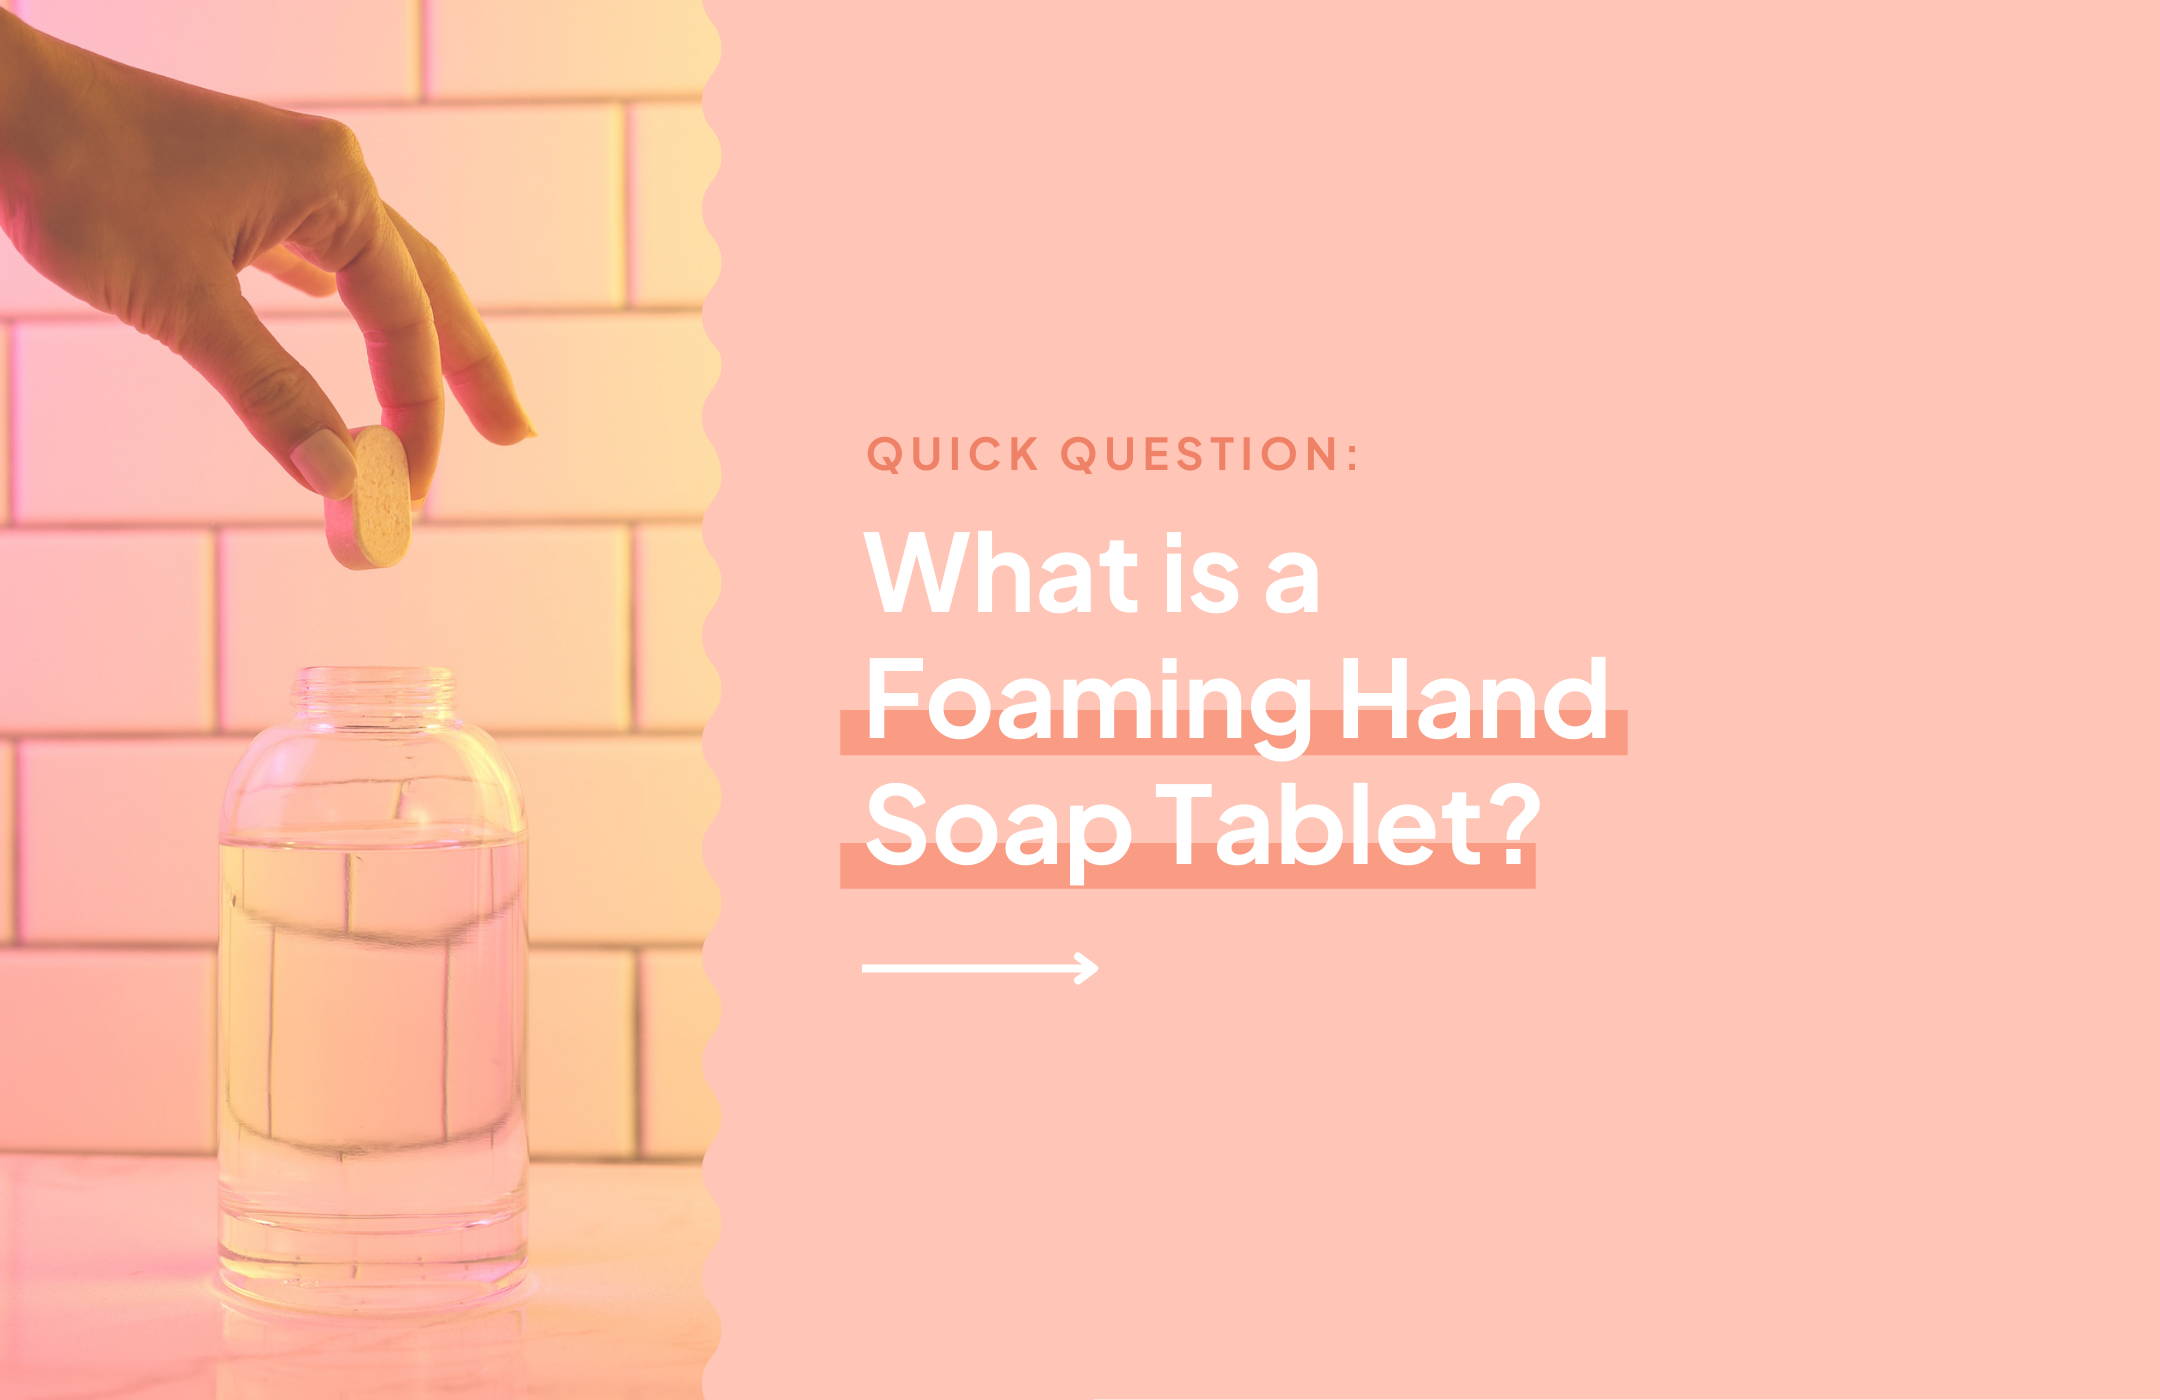 What is a Foaming Hand Soap Tablet?